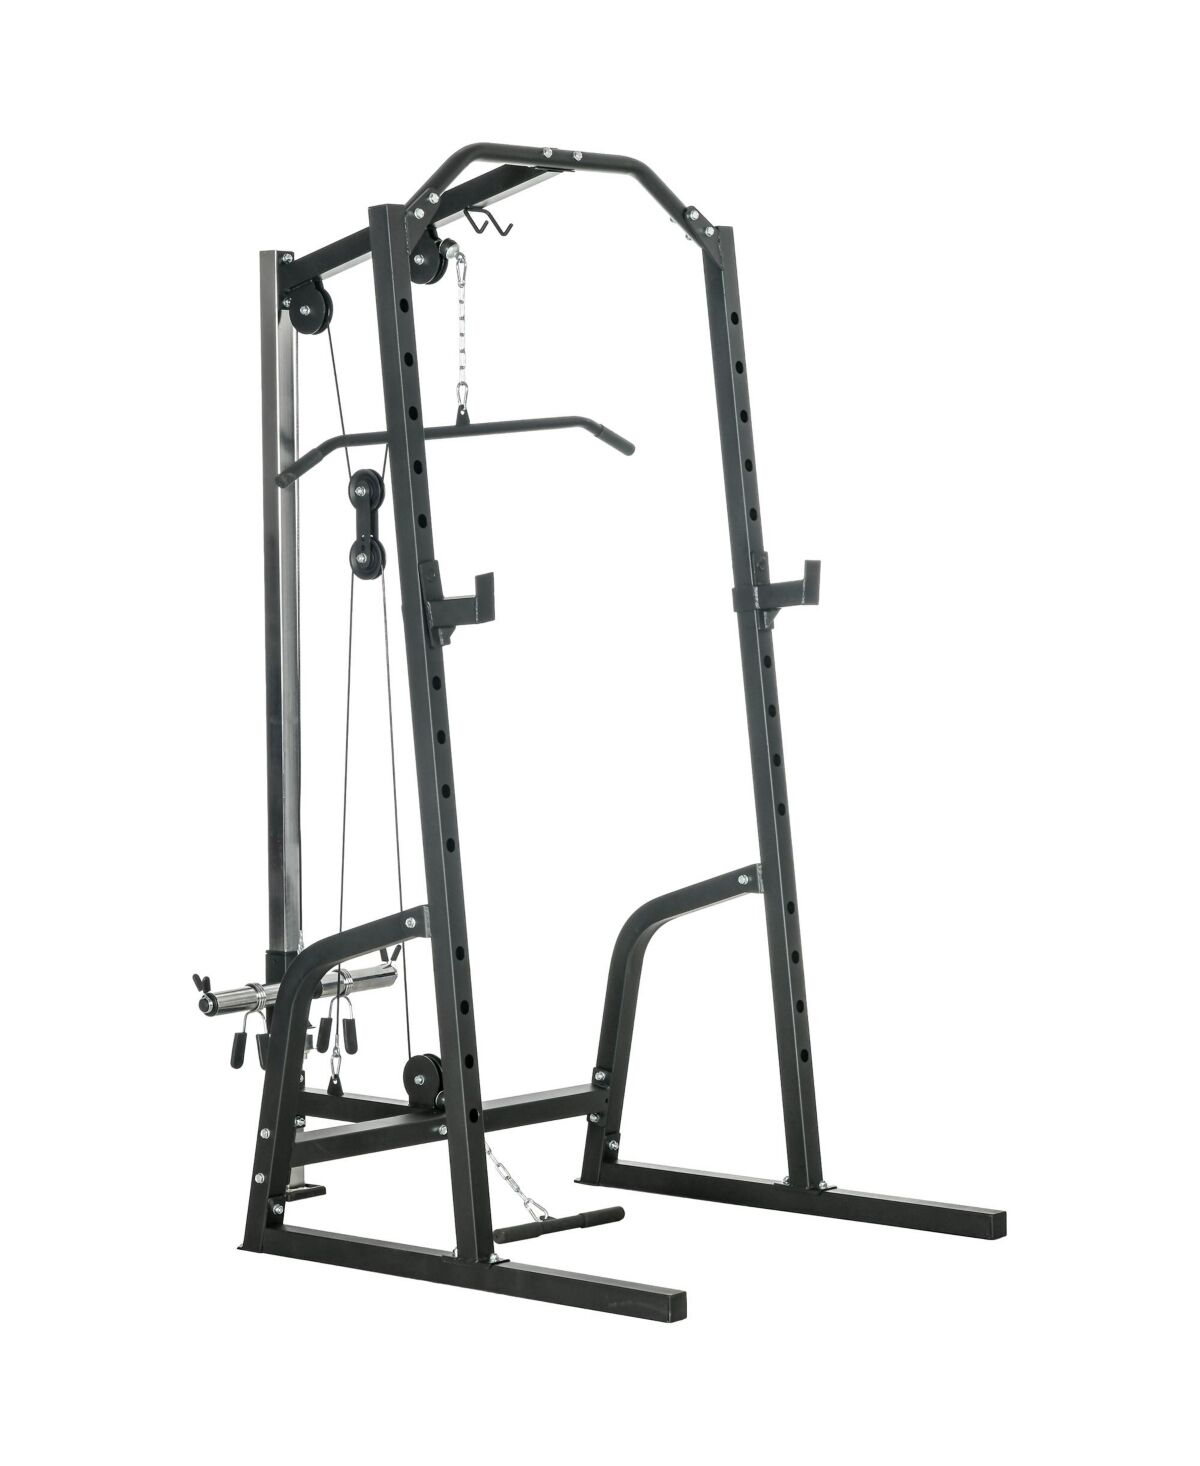 Soozier Power Cage with Pulley System, Squat Rack, Pull up / Push up Stand - Black